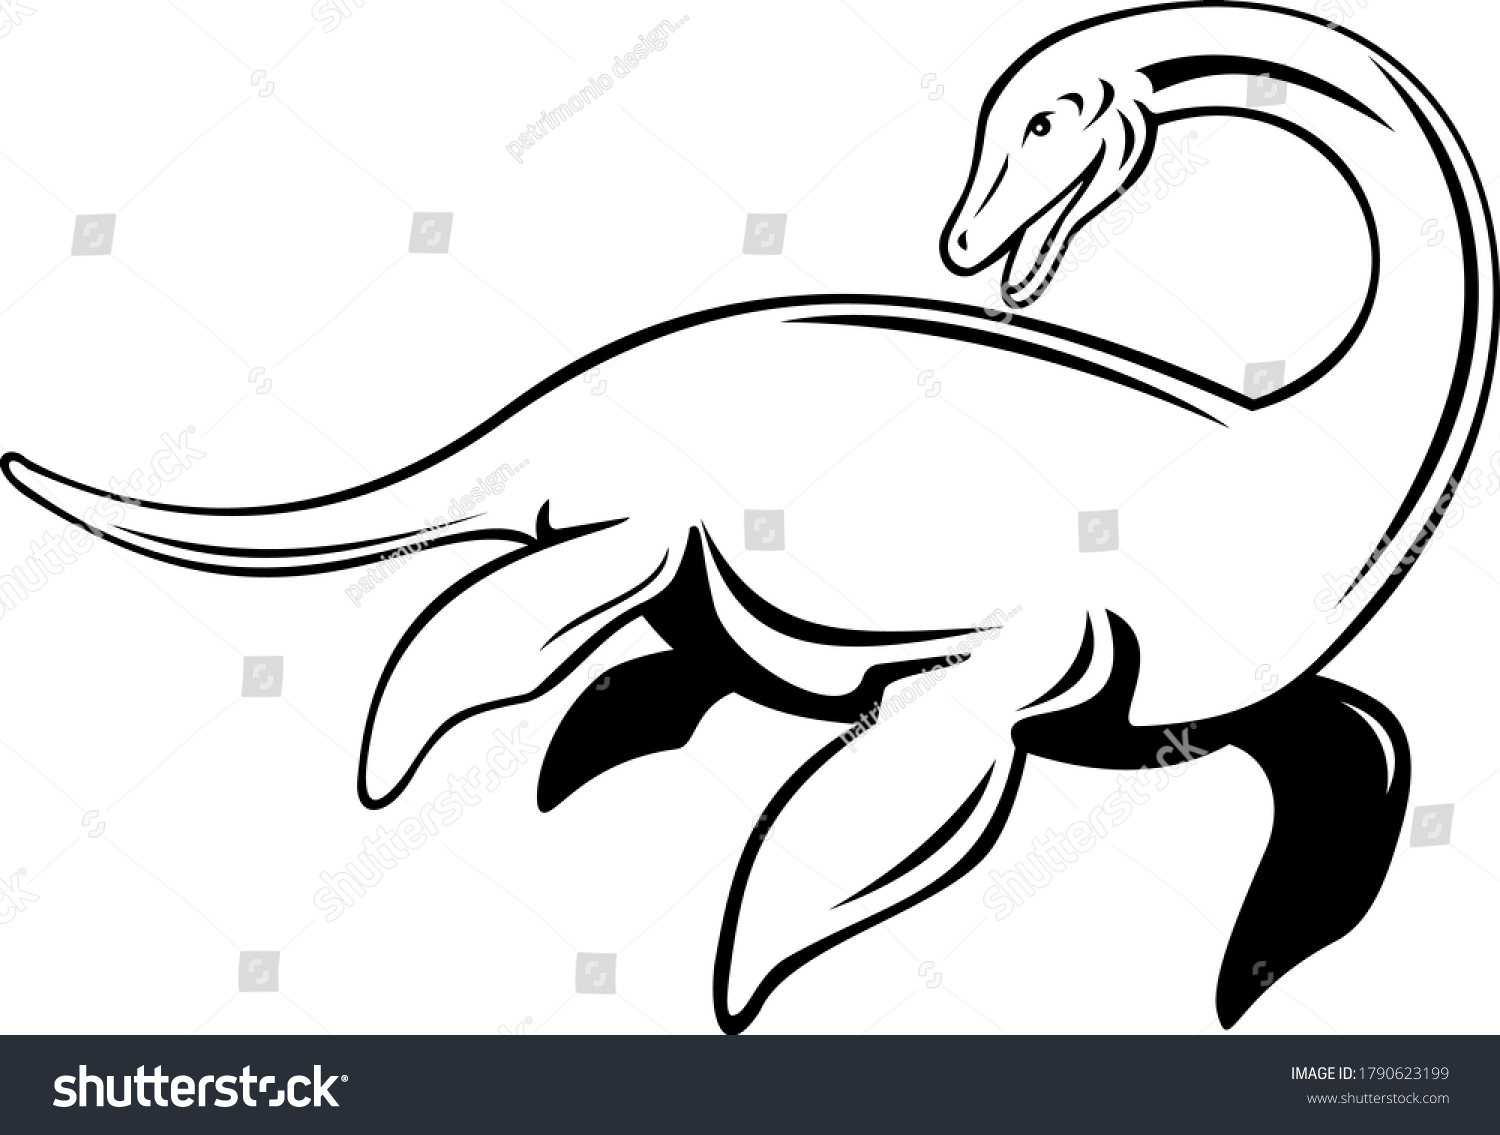 SVG of Loch Ness Monster Niseag or Nessie Swimming Side Retro Black and White svg